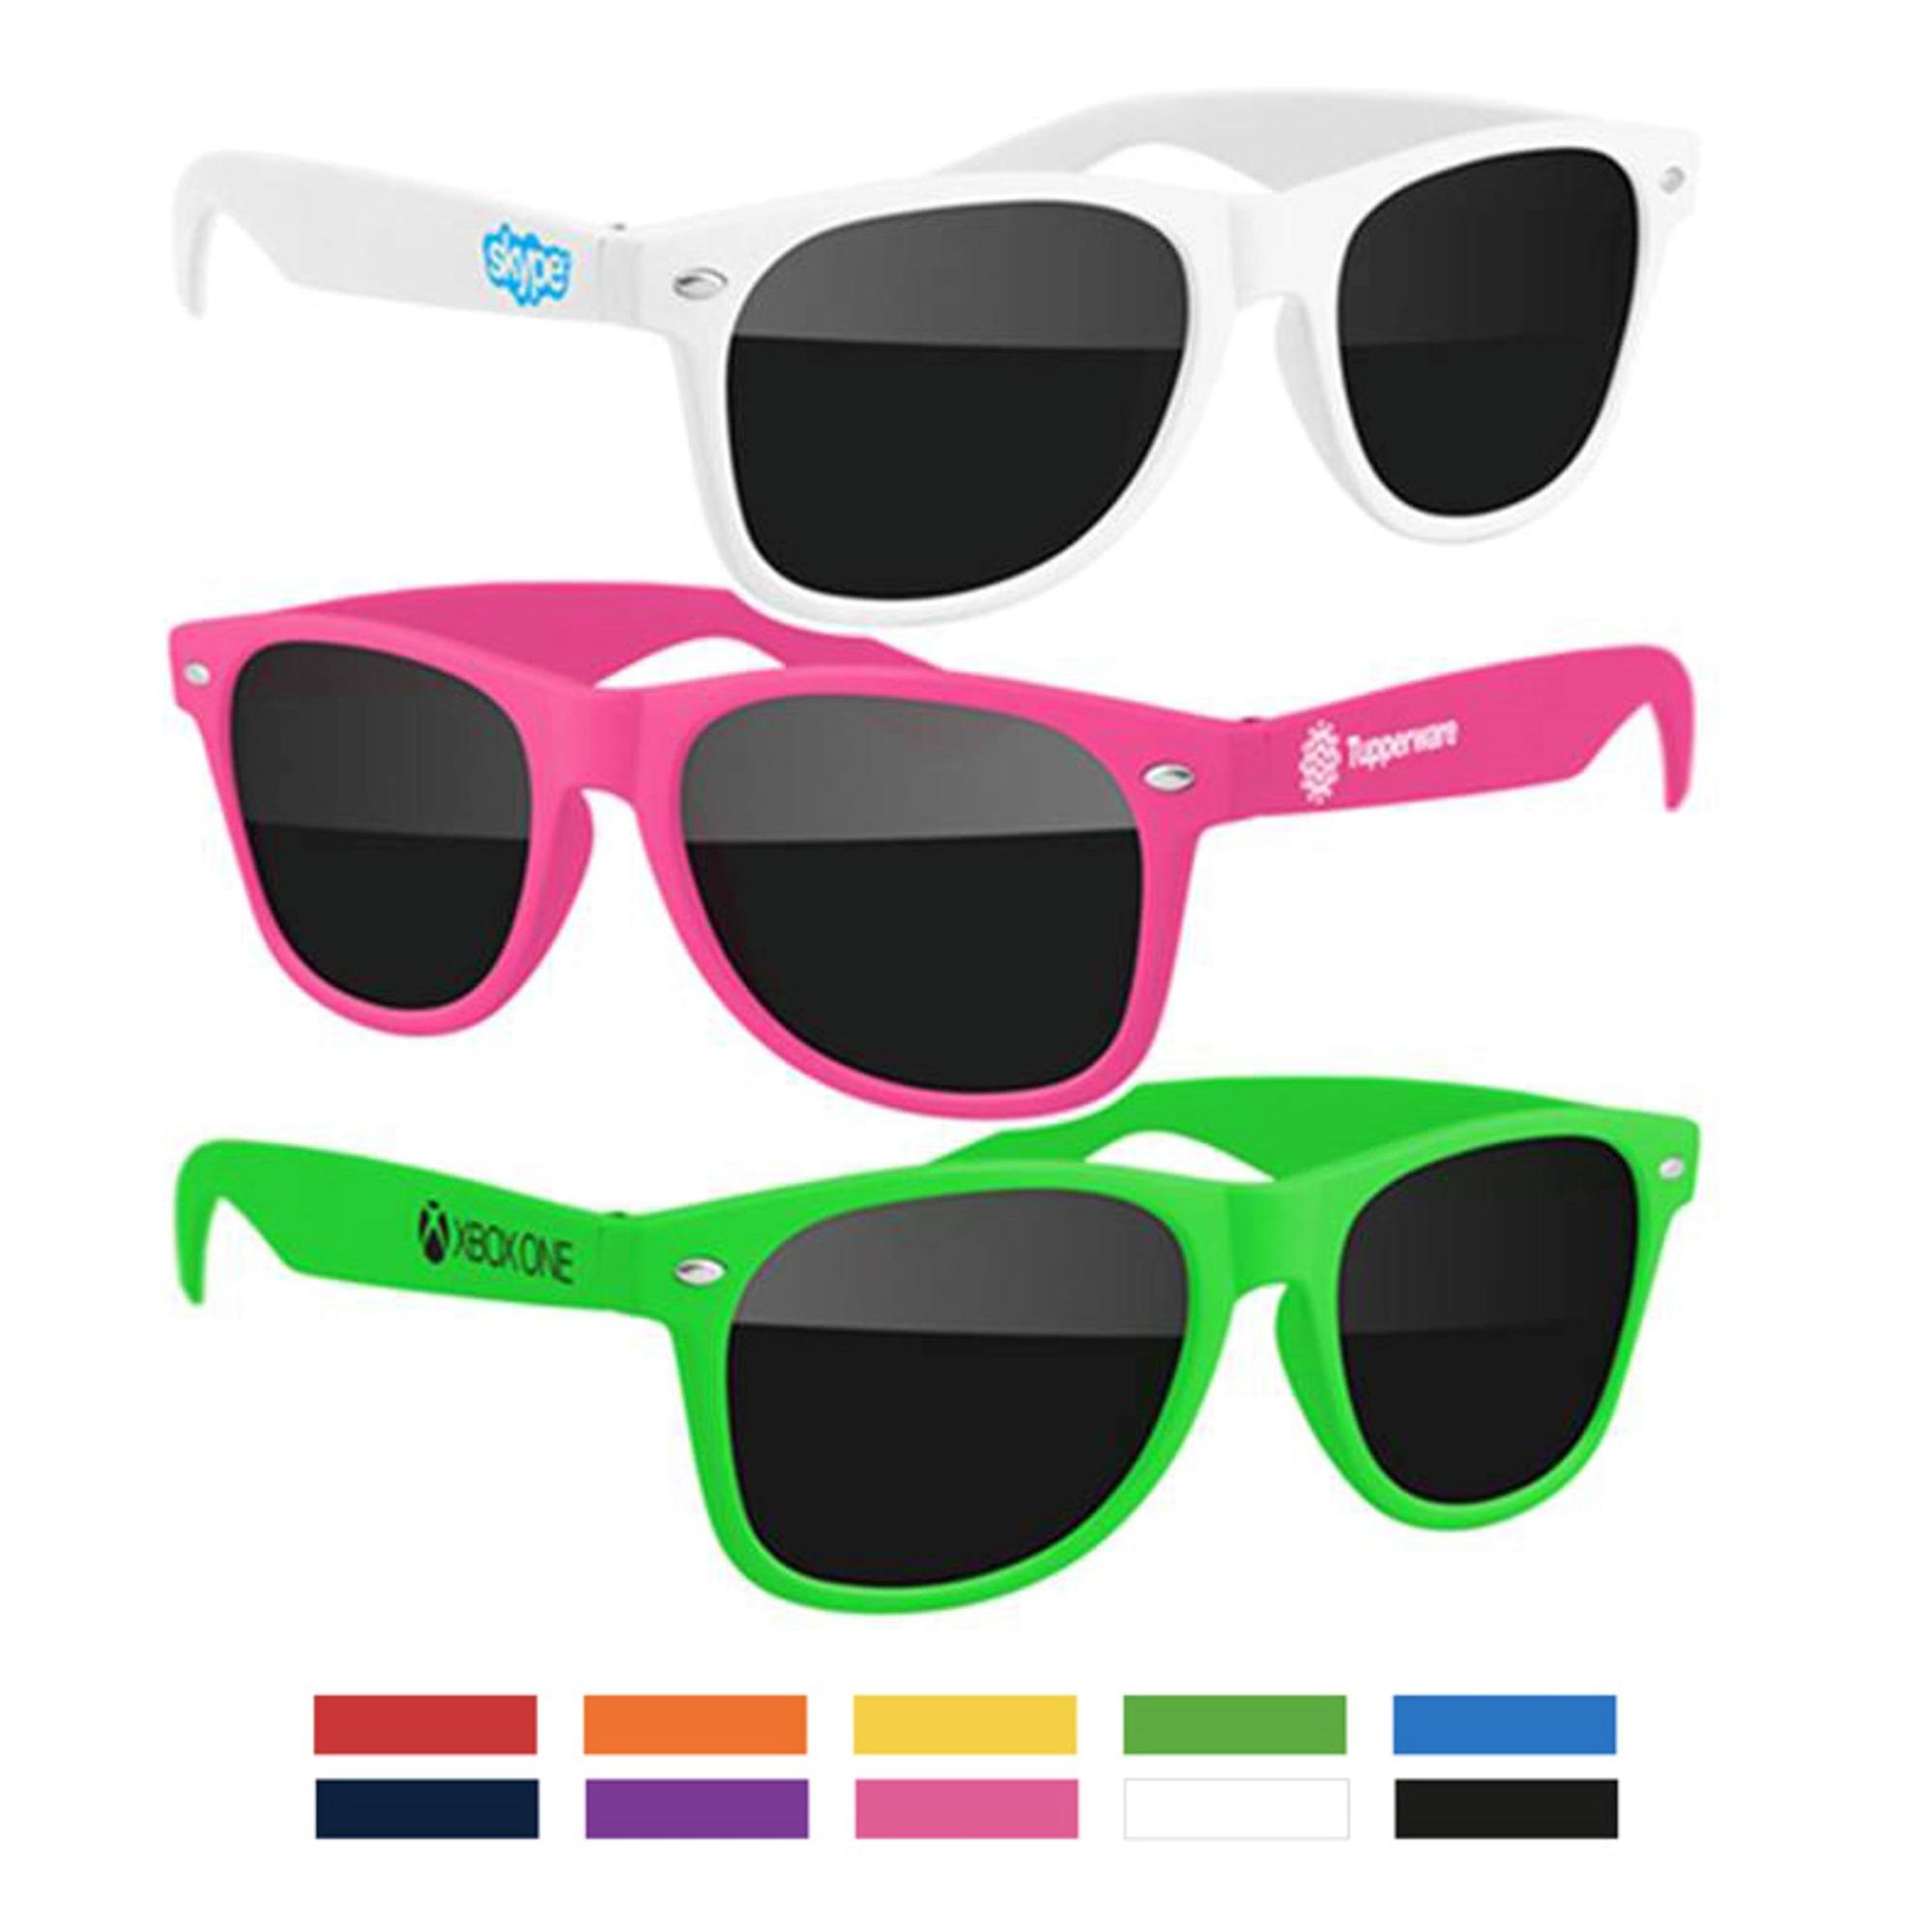 three recycled sunglasses with one arm imprint in white, pink, and green colors